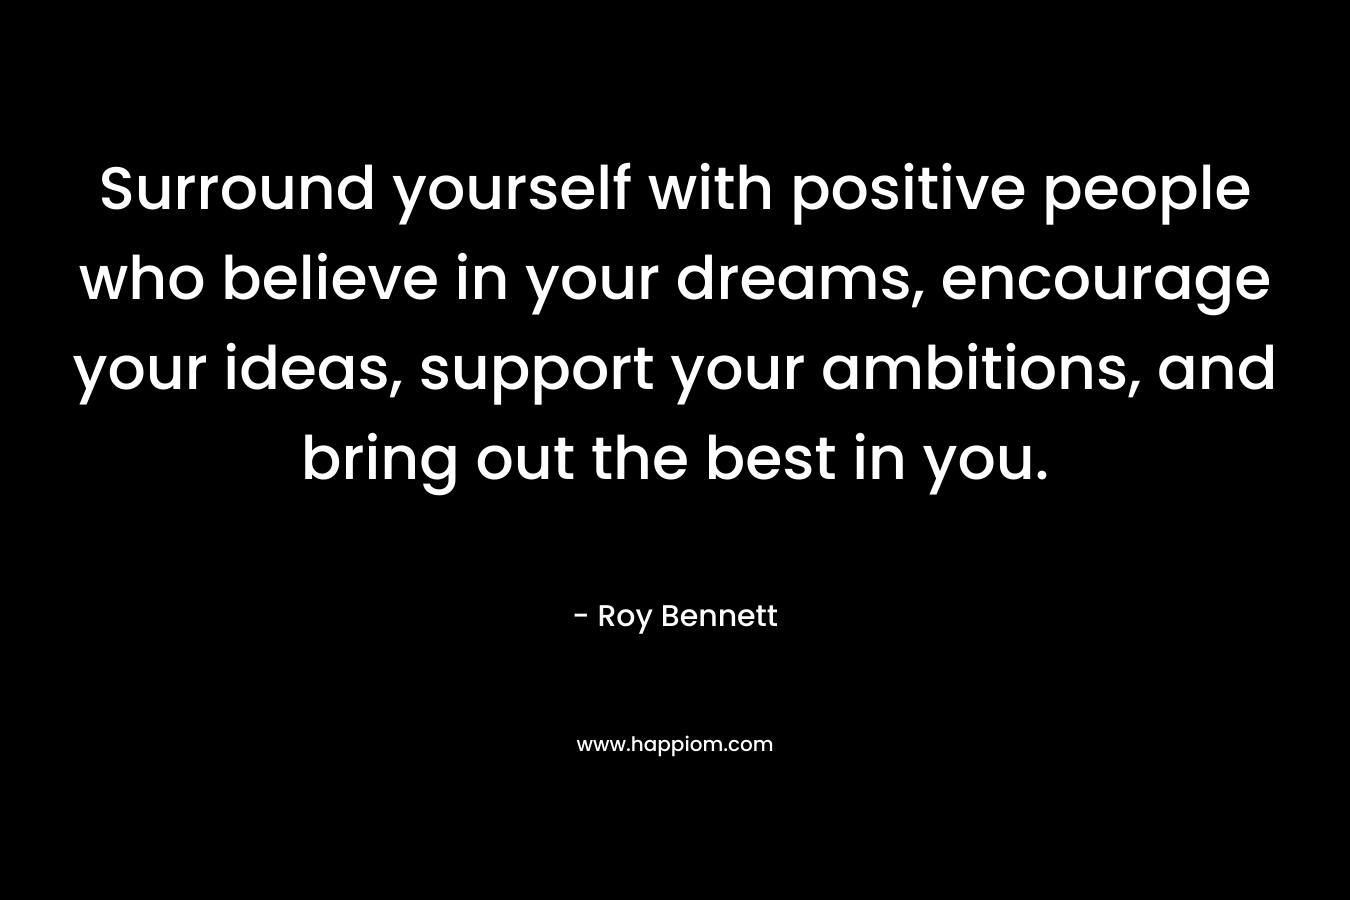 Surround yourself with positive people who believe in your dreams, encourage your ideas, support your ambitions, and bring out the best in you.